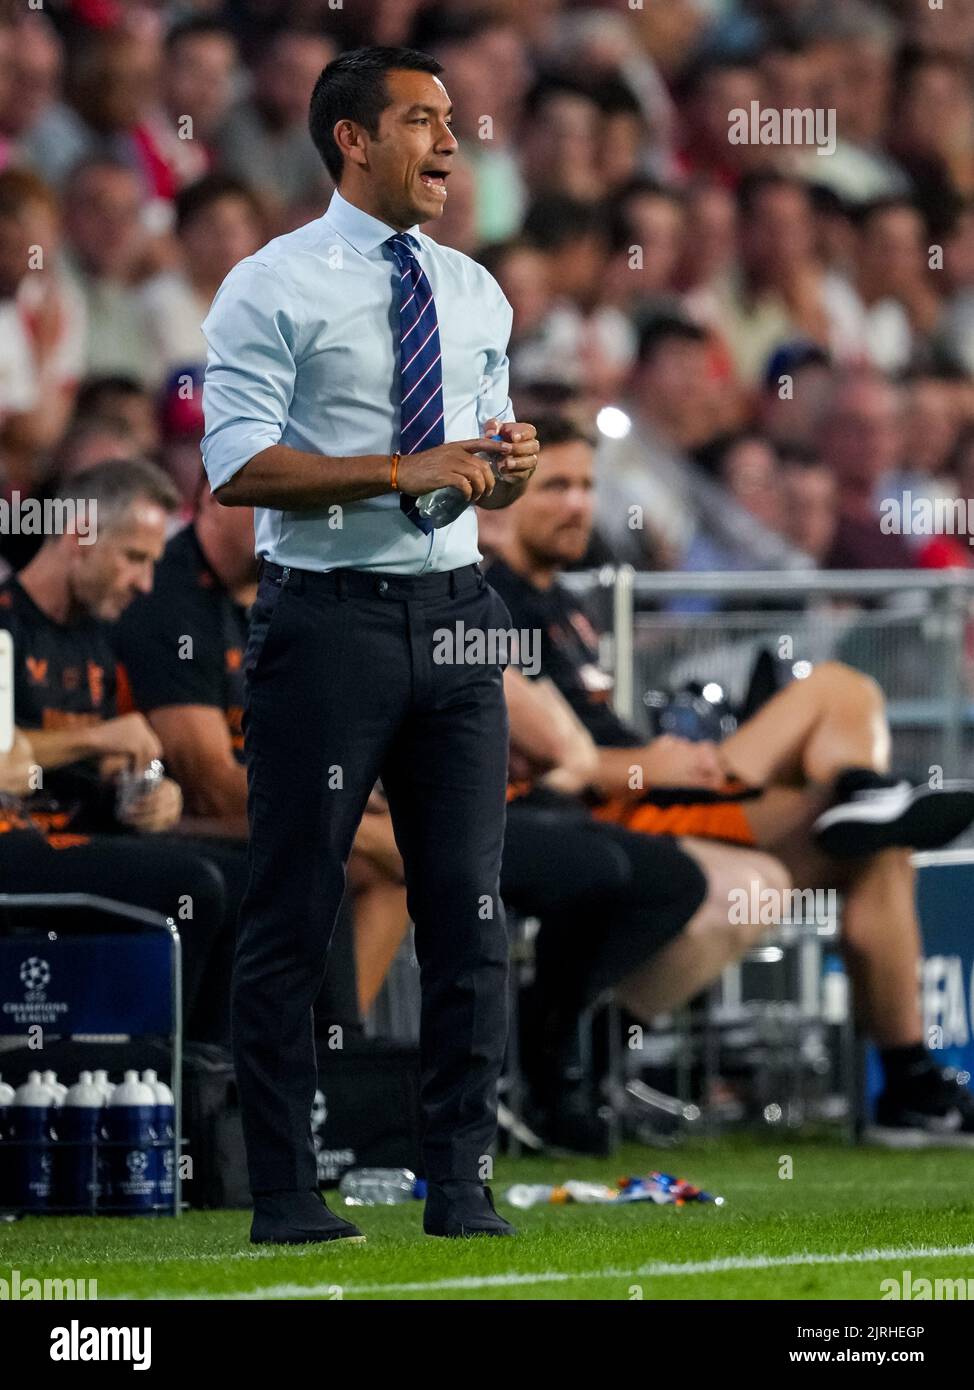 EINDHOVEN, NETHERLANDS - AUGUST 24: Coach Giovanni van Bronckhorst of Rangers during the UEFA Champions League Play-Off Second Leg match between PSV and Rangers at the Philips Stadion on August 24, 2022 in Eindhoven, Netherlands (Photo by Geert van Erven/Orange Pictures) Stock Photo